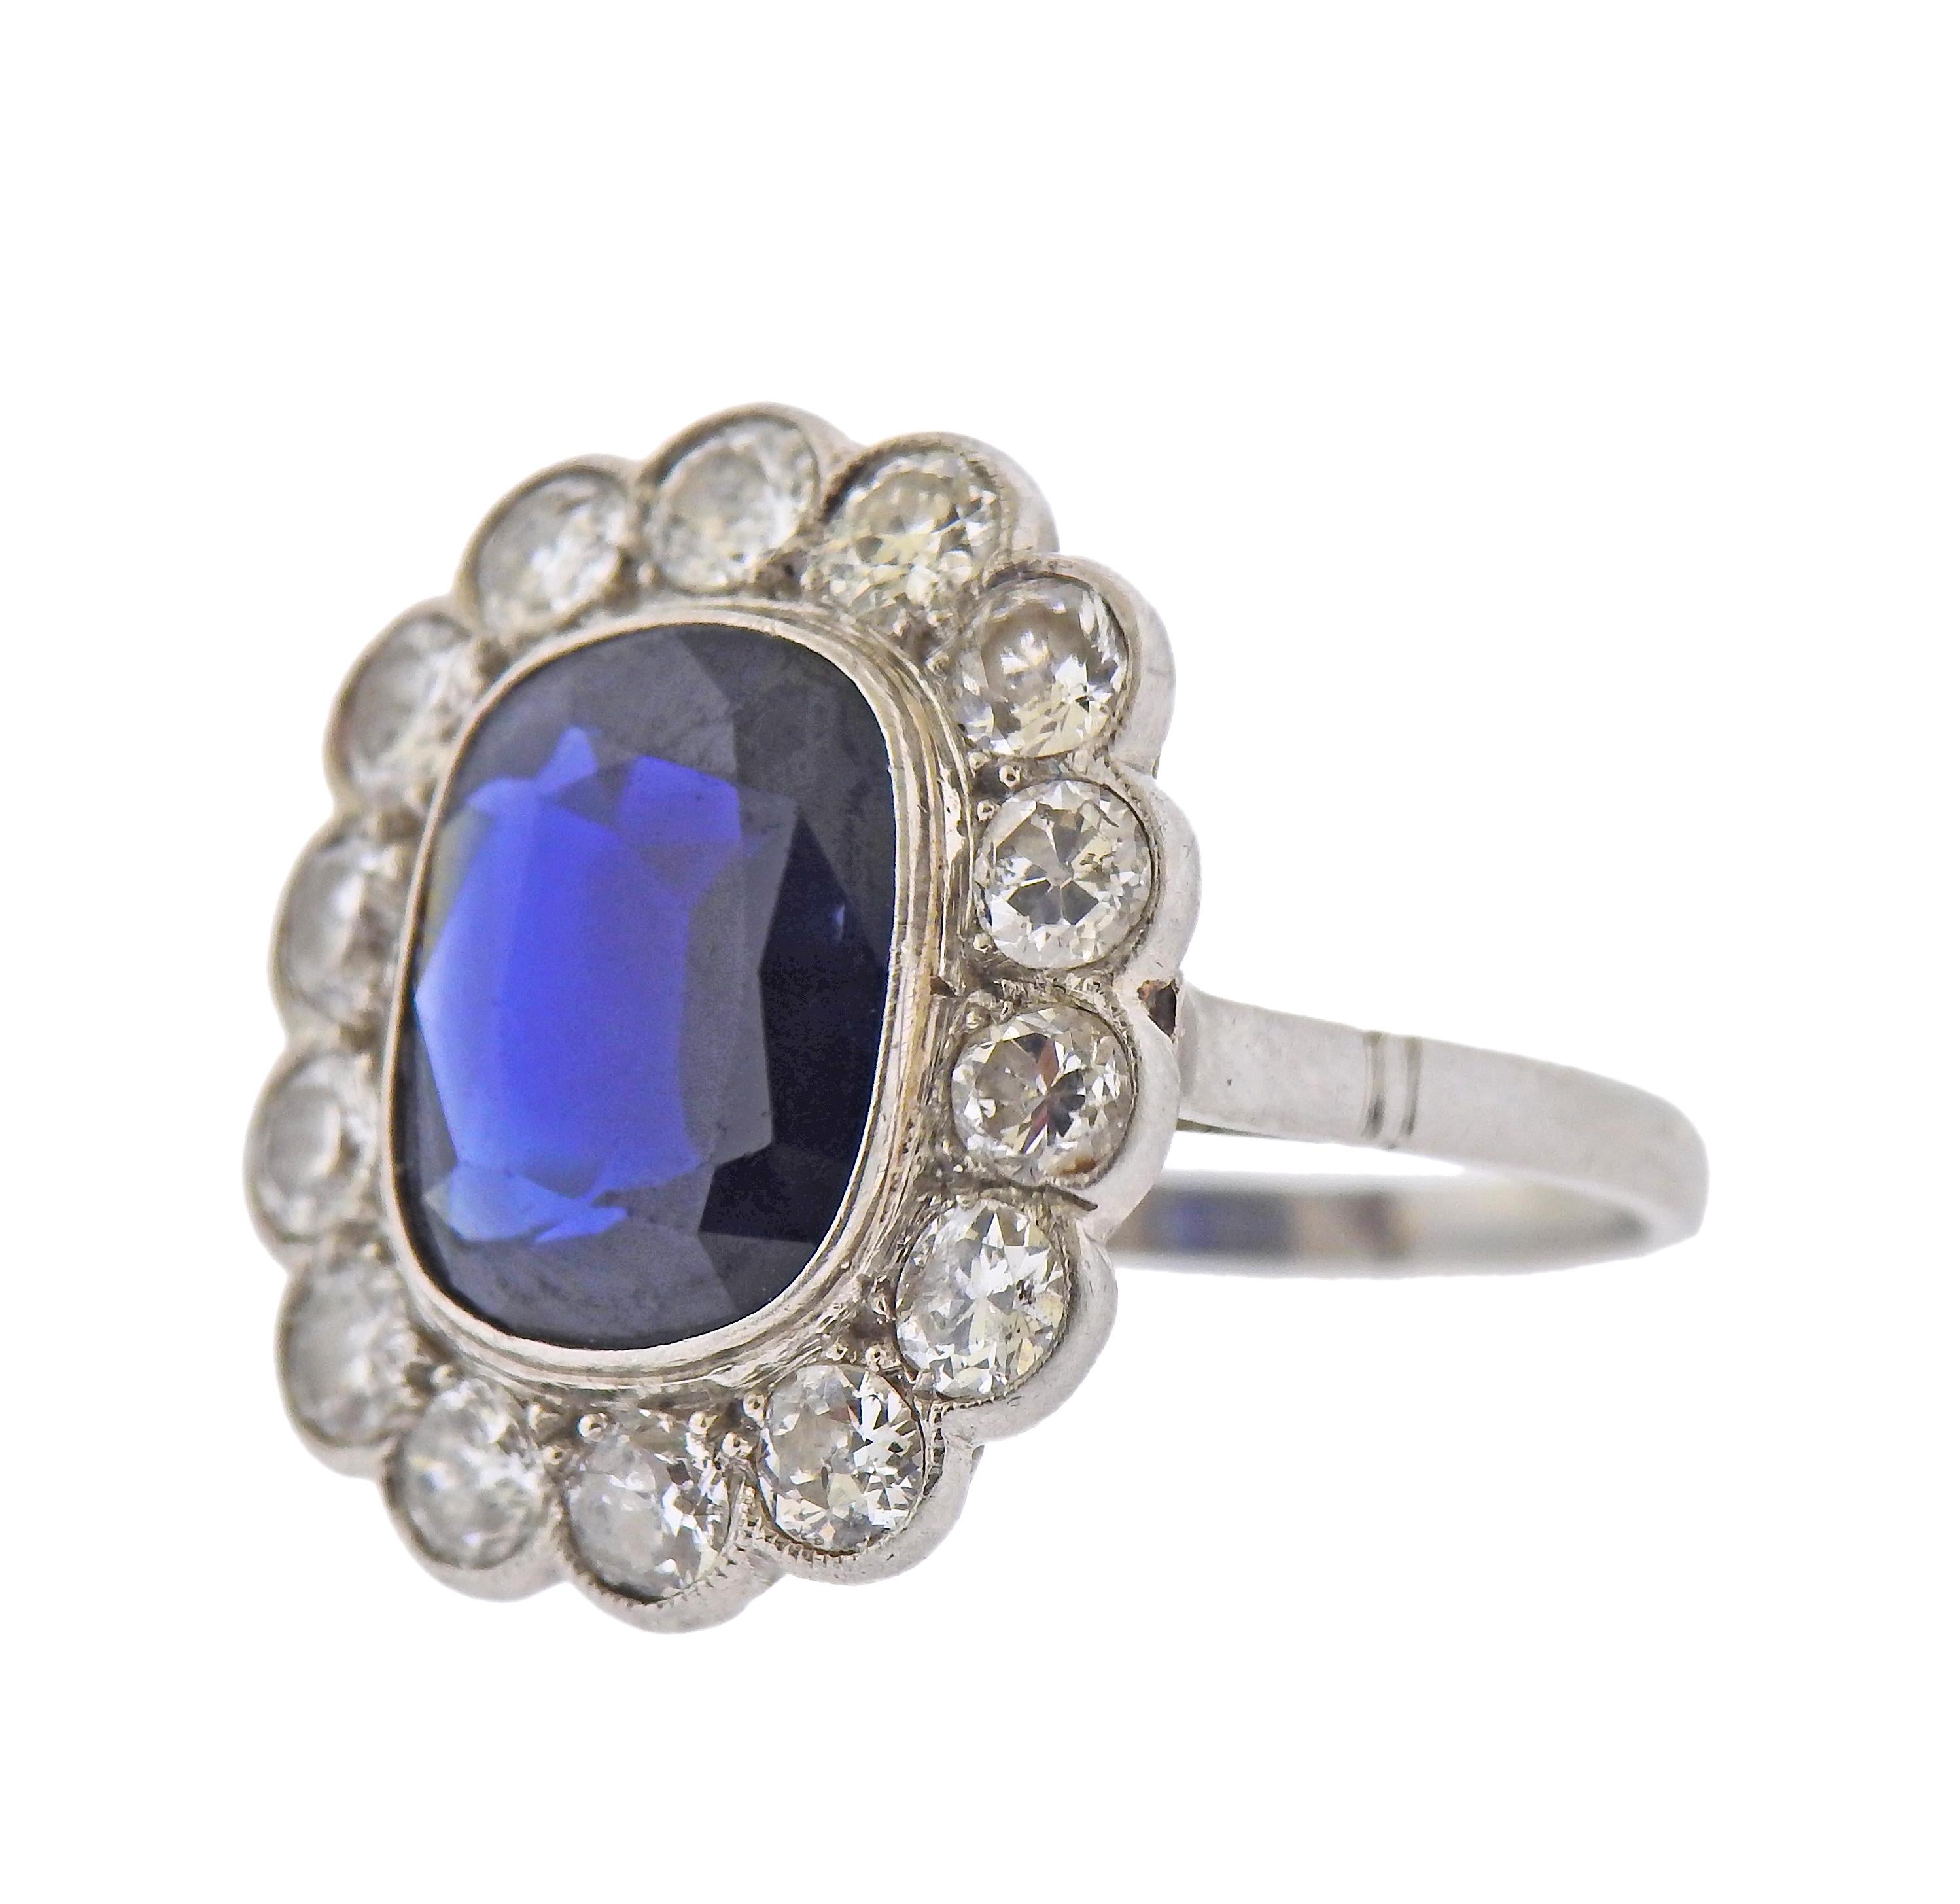 Art Deco platinum ring, with center 11.7mm x 9mm x 4.2mm sapphire, surrounded with approx. 1.40ctw in diamonds. Ring size - 5.75, ring top - 20mm x 18mm. Tested plat. Weight - 5.4 grams. 